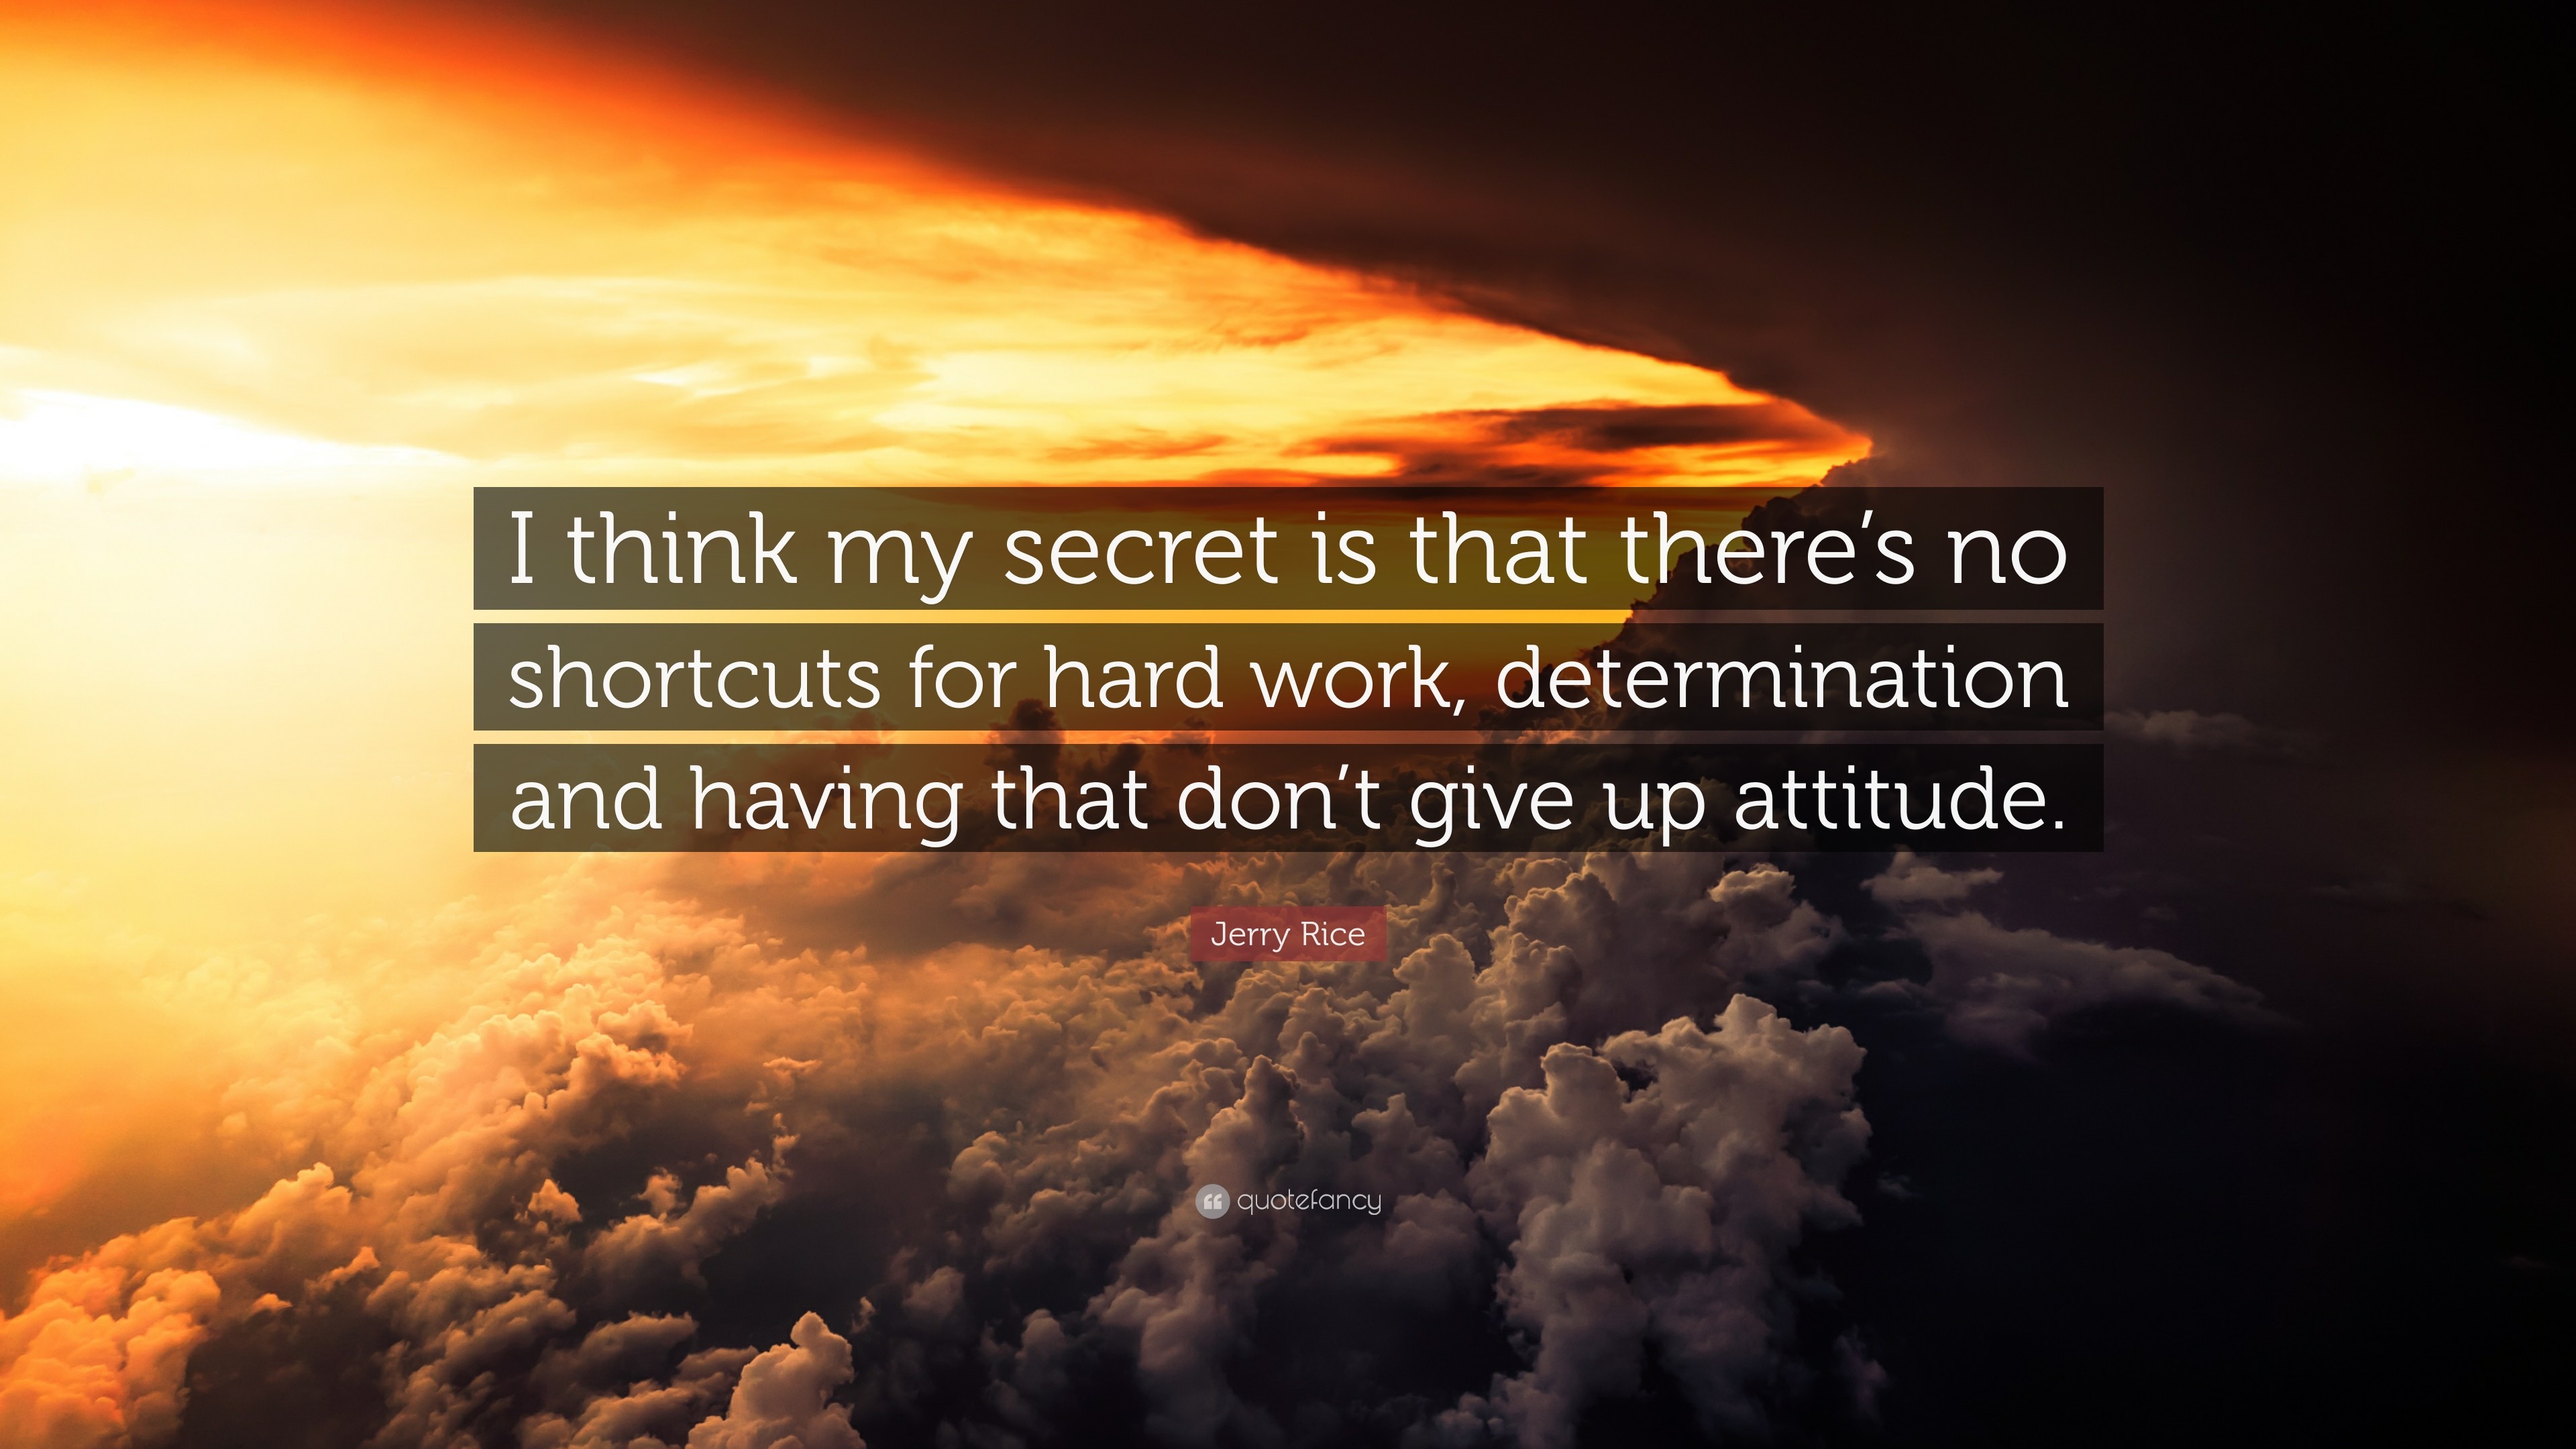 3840x2160 Jerry Rice Quote: “I think my secret is that there's no shortcuts for hard